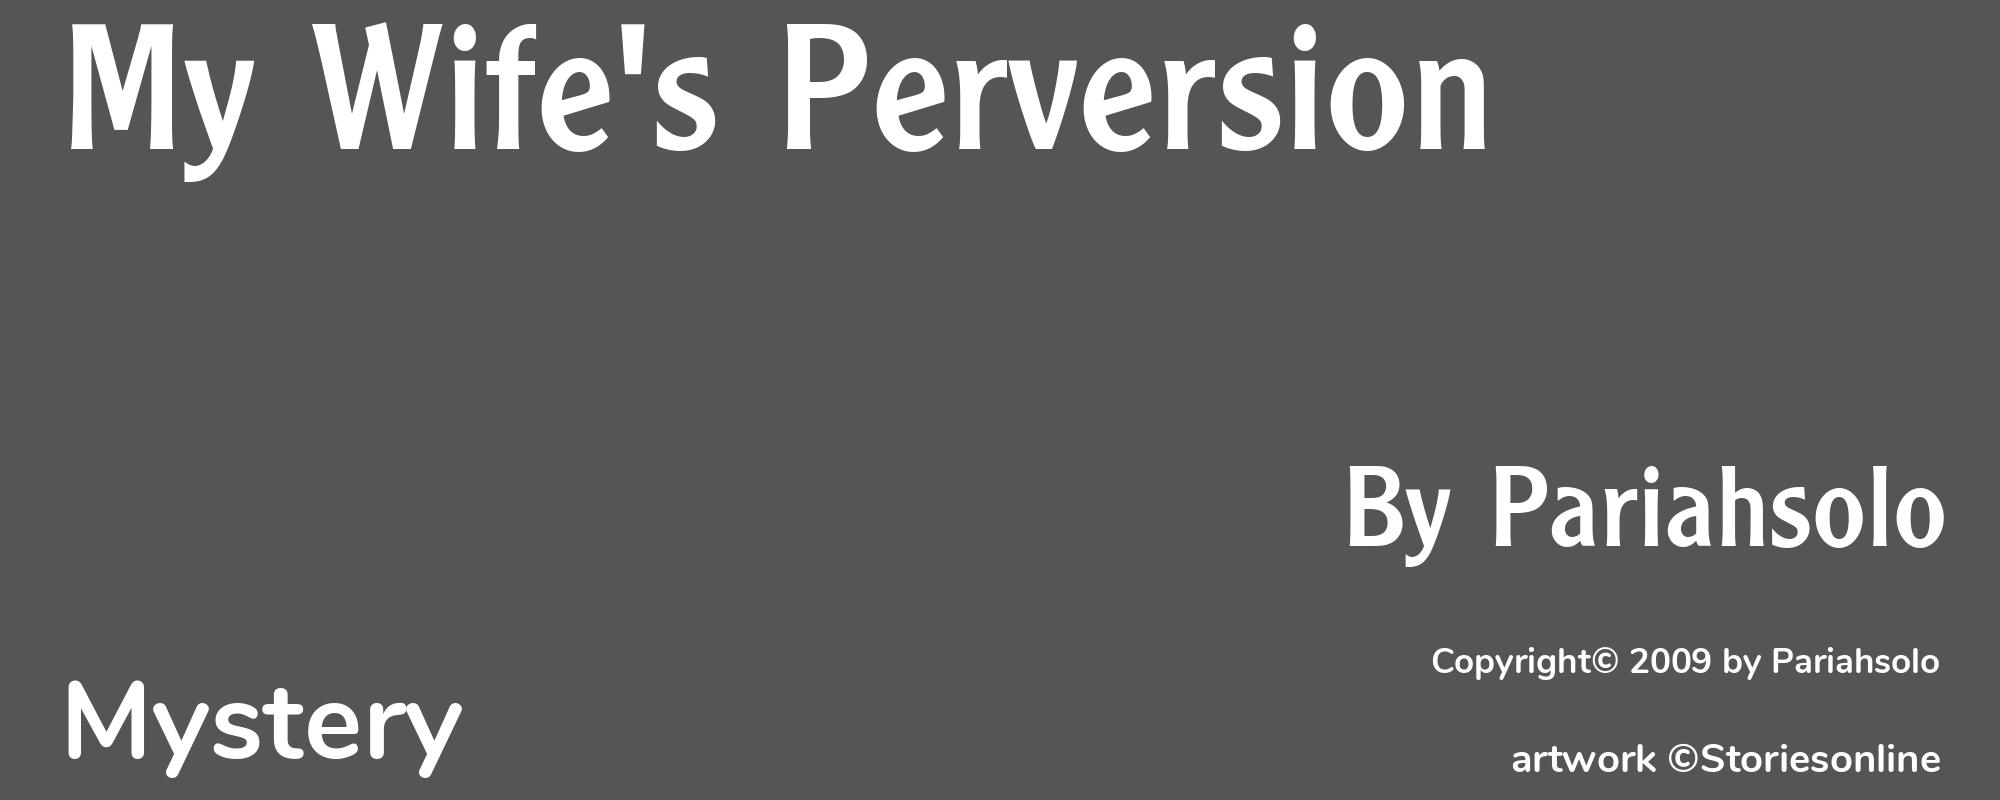 My Wife's Perversion - Cover